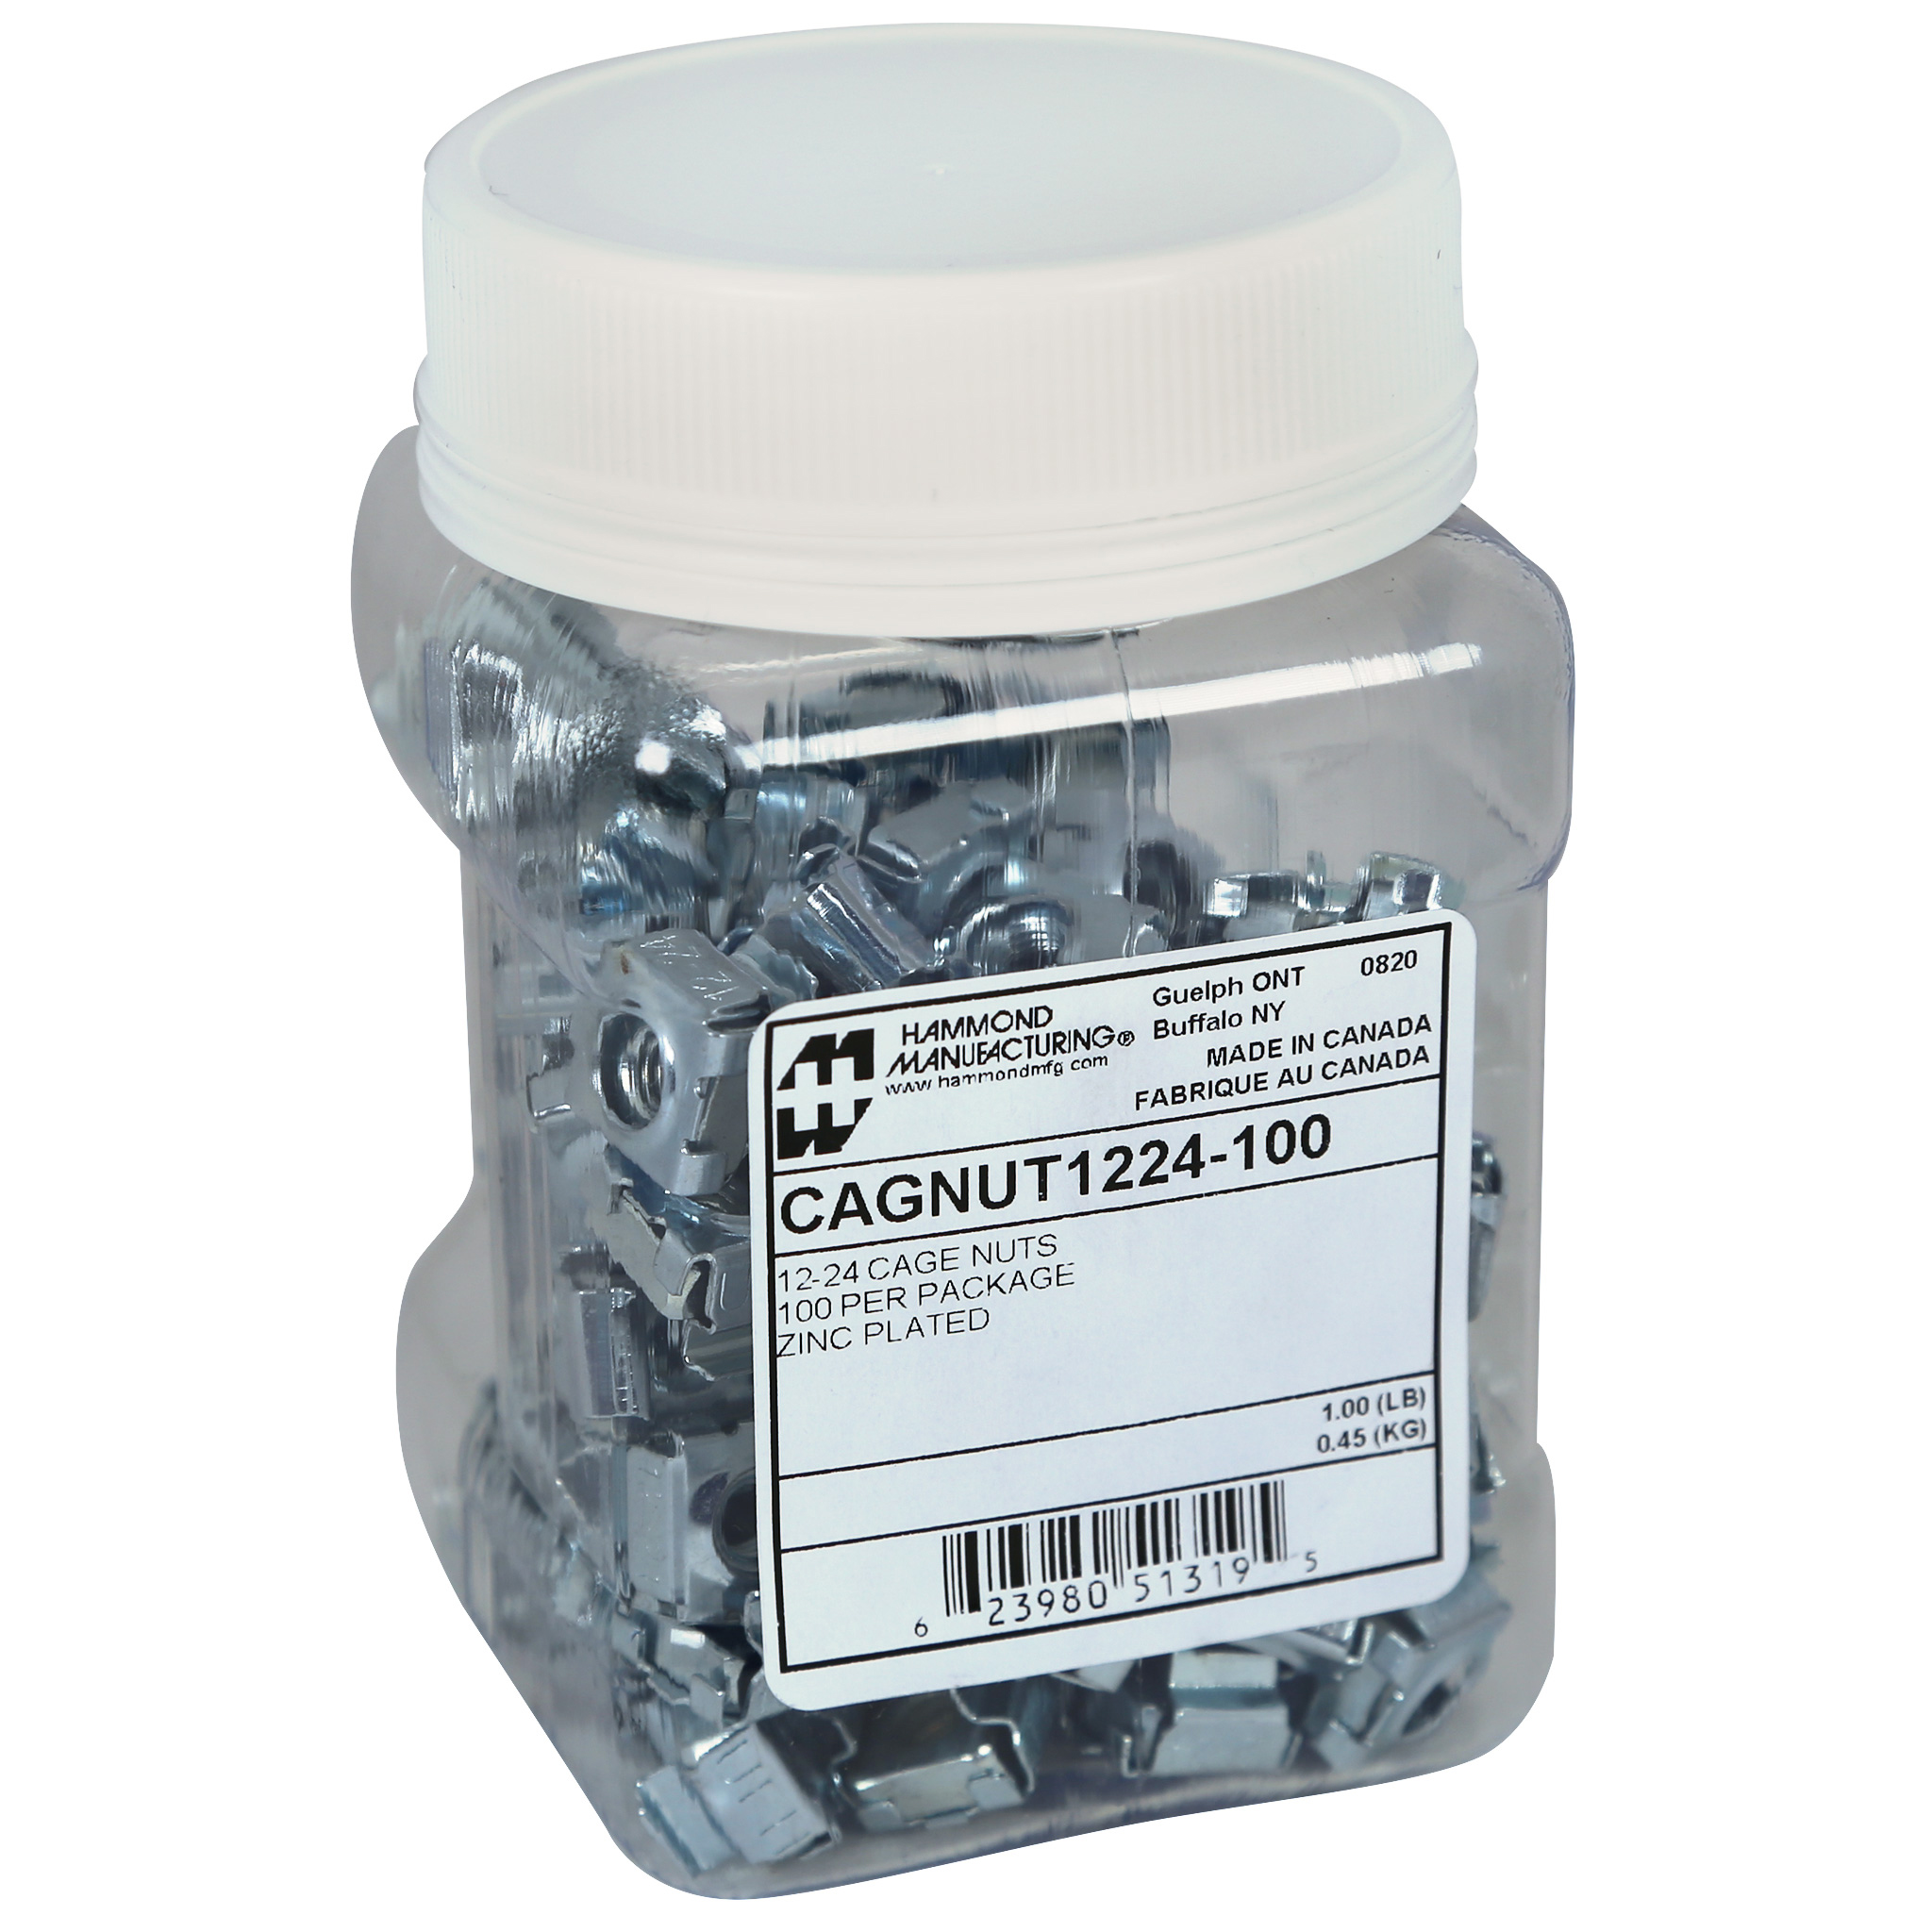 【CAGNUT1224-100】CAGE NUT STEEL 12-24 100/PK